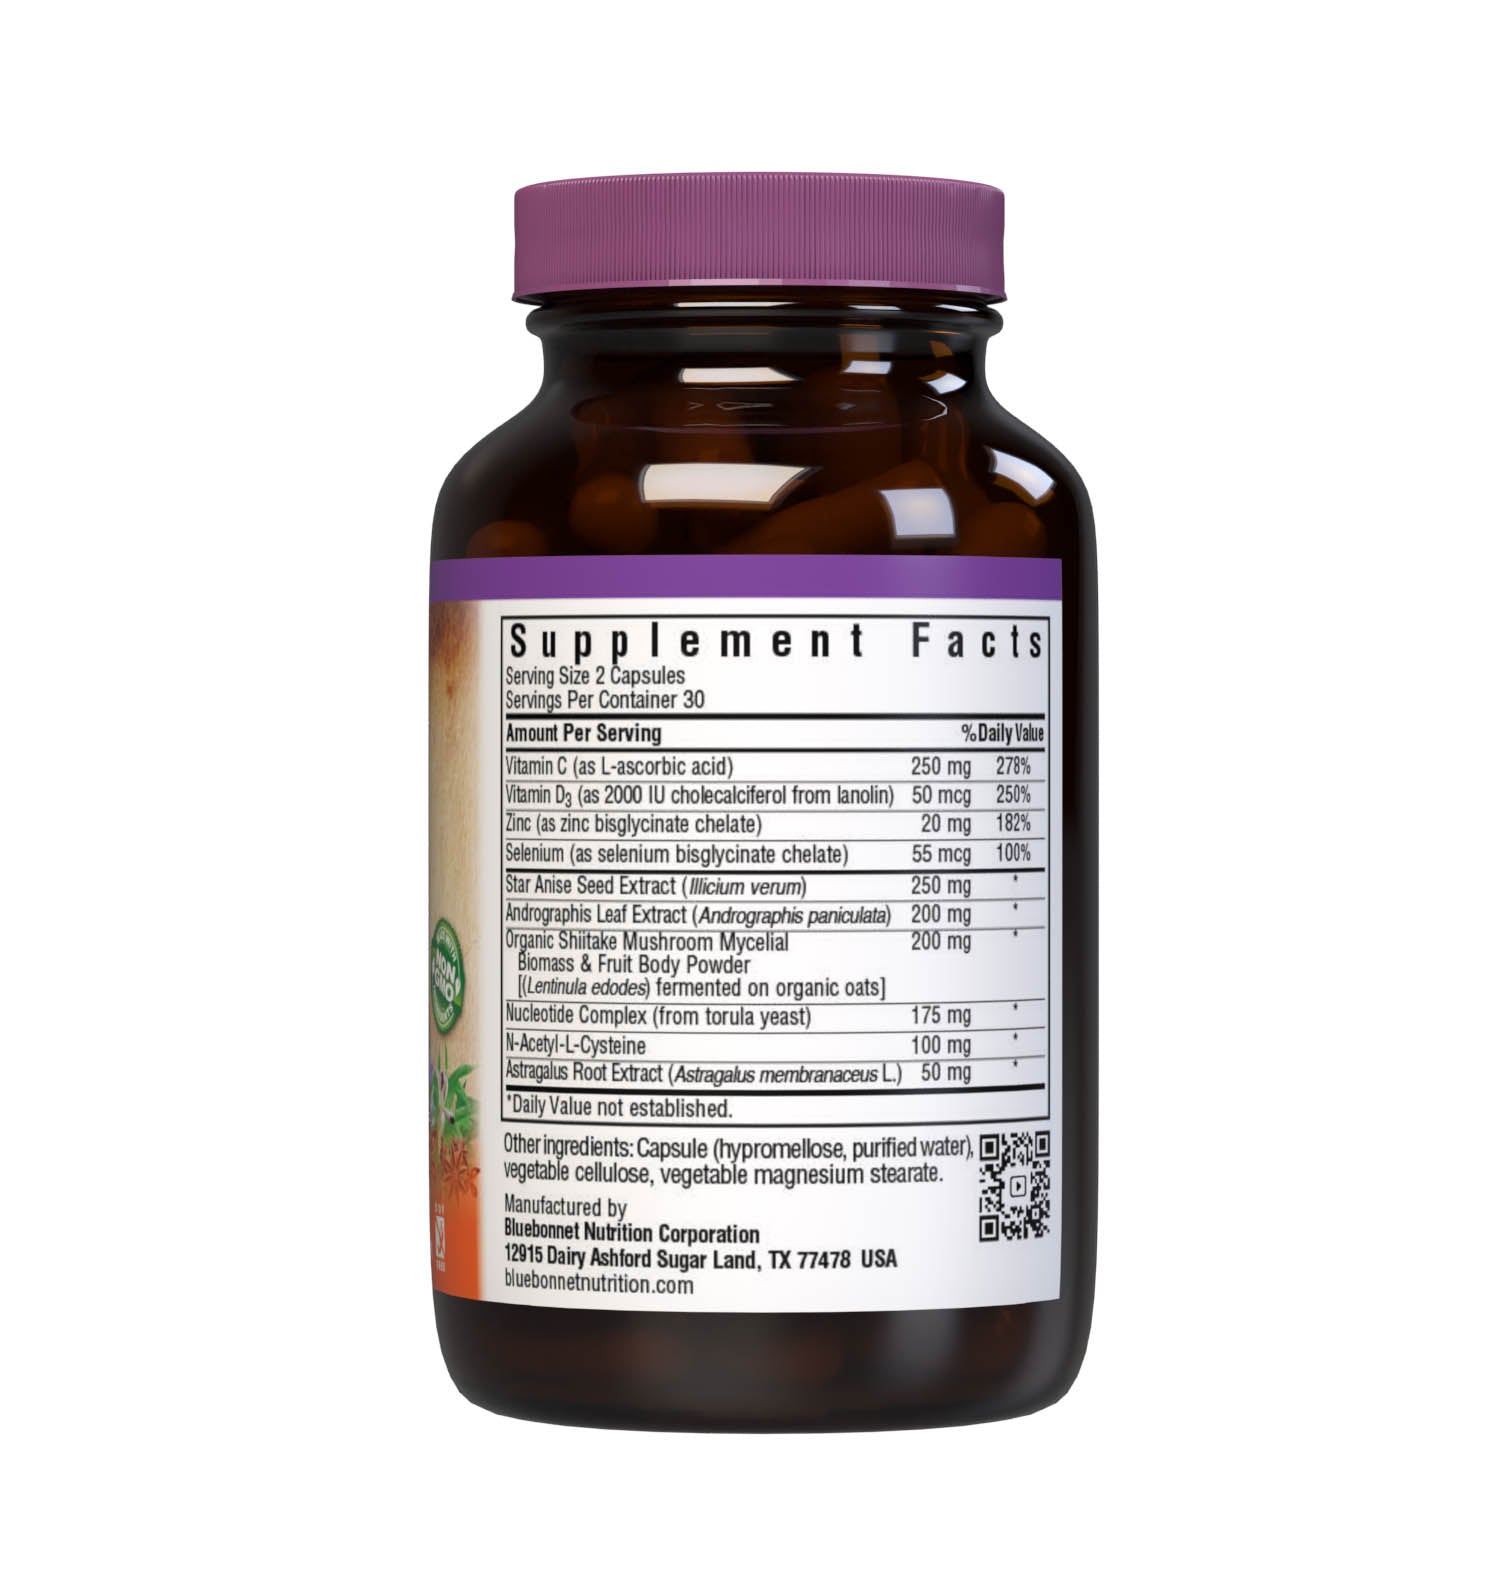 Bluebonnet’s Targeted Choice Immune Support 60 Vegetable Capsules are specially formulated to support immune function and antioxidant protection with a unique combination of vitamins, minerals and immune-boosting nutrients for optimal wellness. Supplement facts panel. #size_60 count